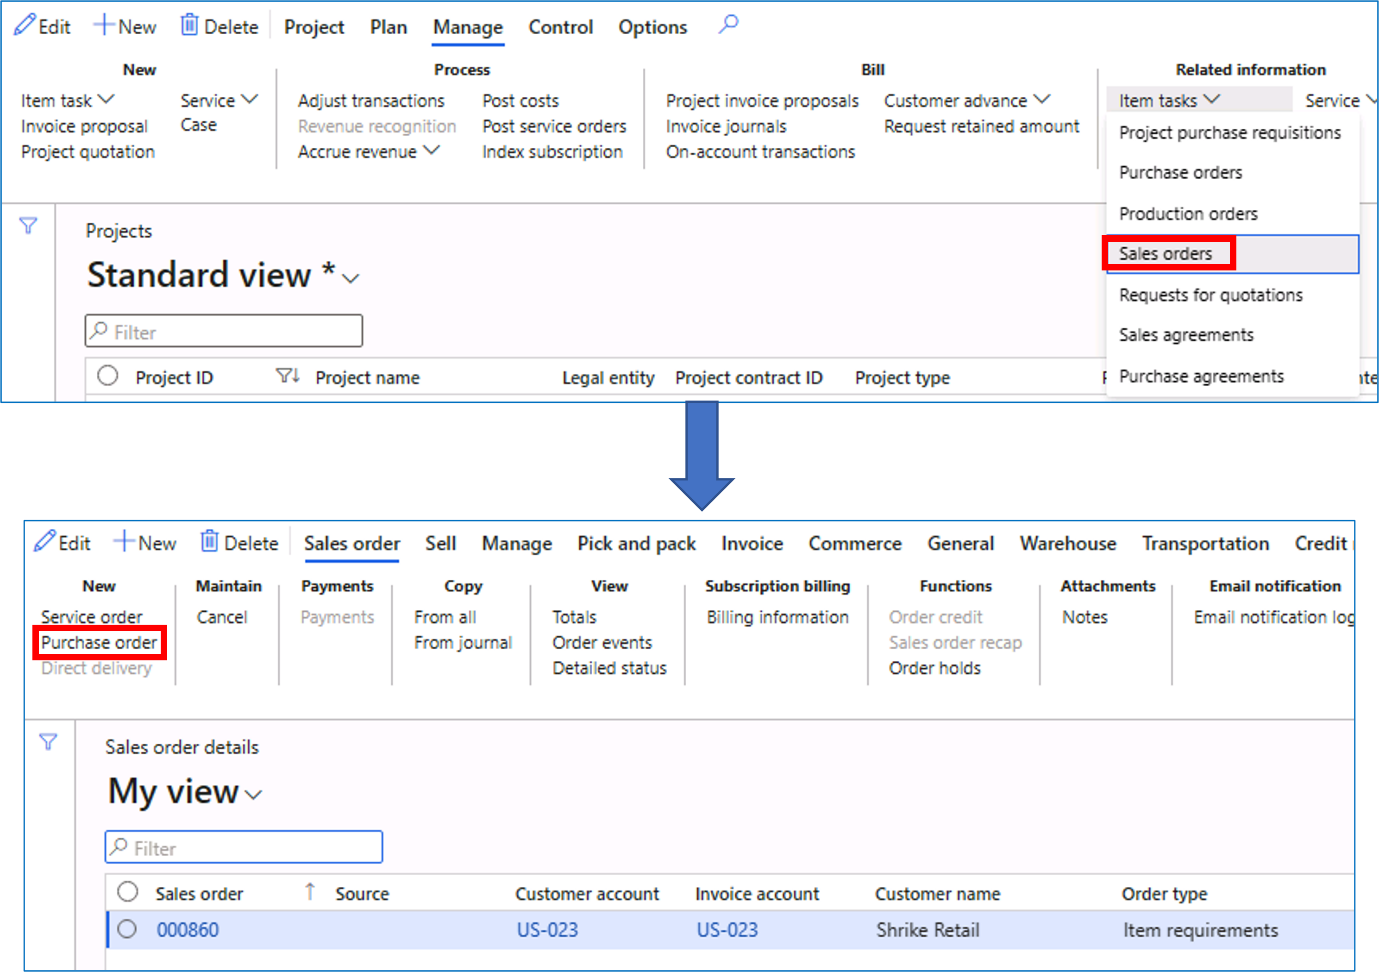 Screenshot of the creation of a purchase order from a sales order. The sales orders option is selected from the project page.